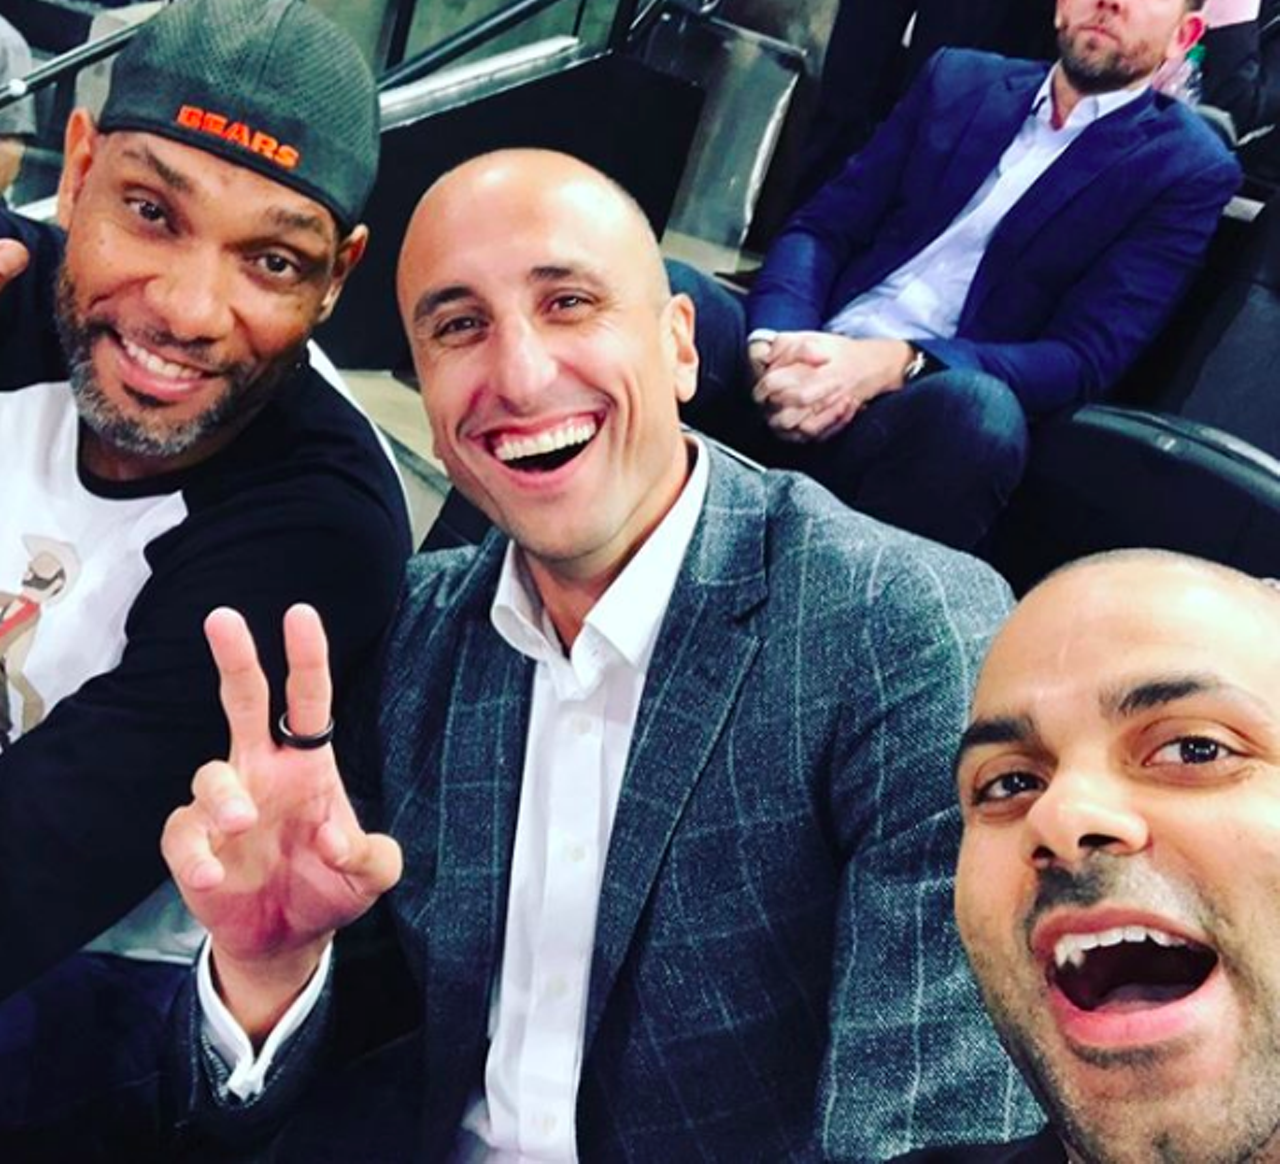 He’s part of the Big Three.
A lot of fans may have a better liking to Tim Duncan or Manu Ginobili, but there’s no denying that Tony Parker has earned his keep in the hearts of San Antonians and Spurs fans alike. On top of being extremely lovable, the Big Three is the winningest trio in NBA history.
Photo via Instagram / _tonyparker09